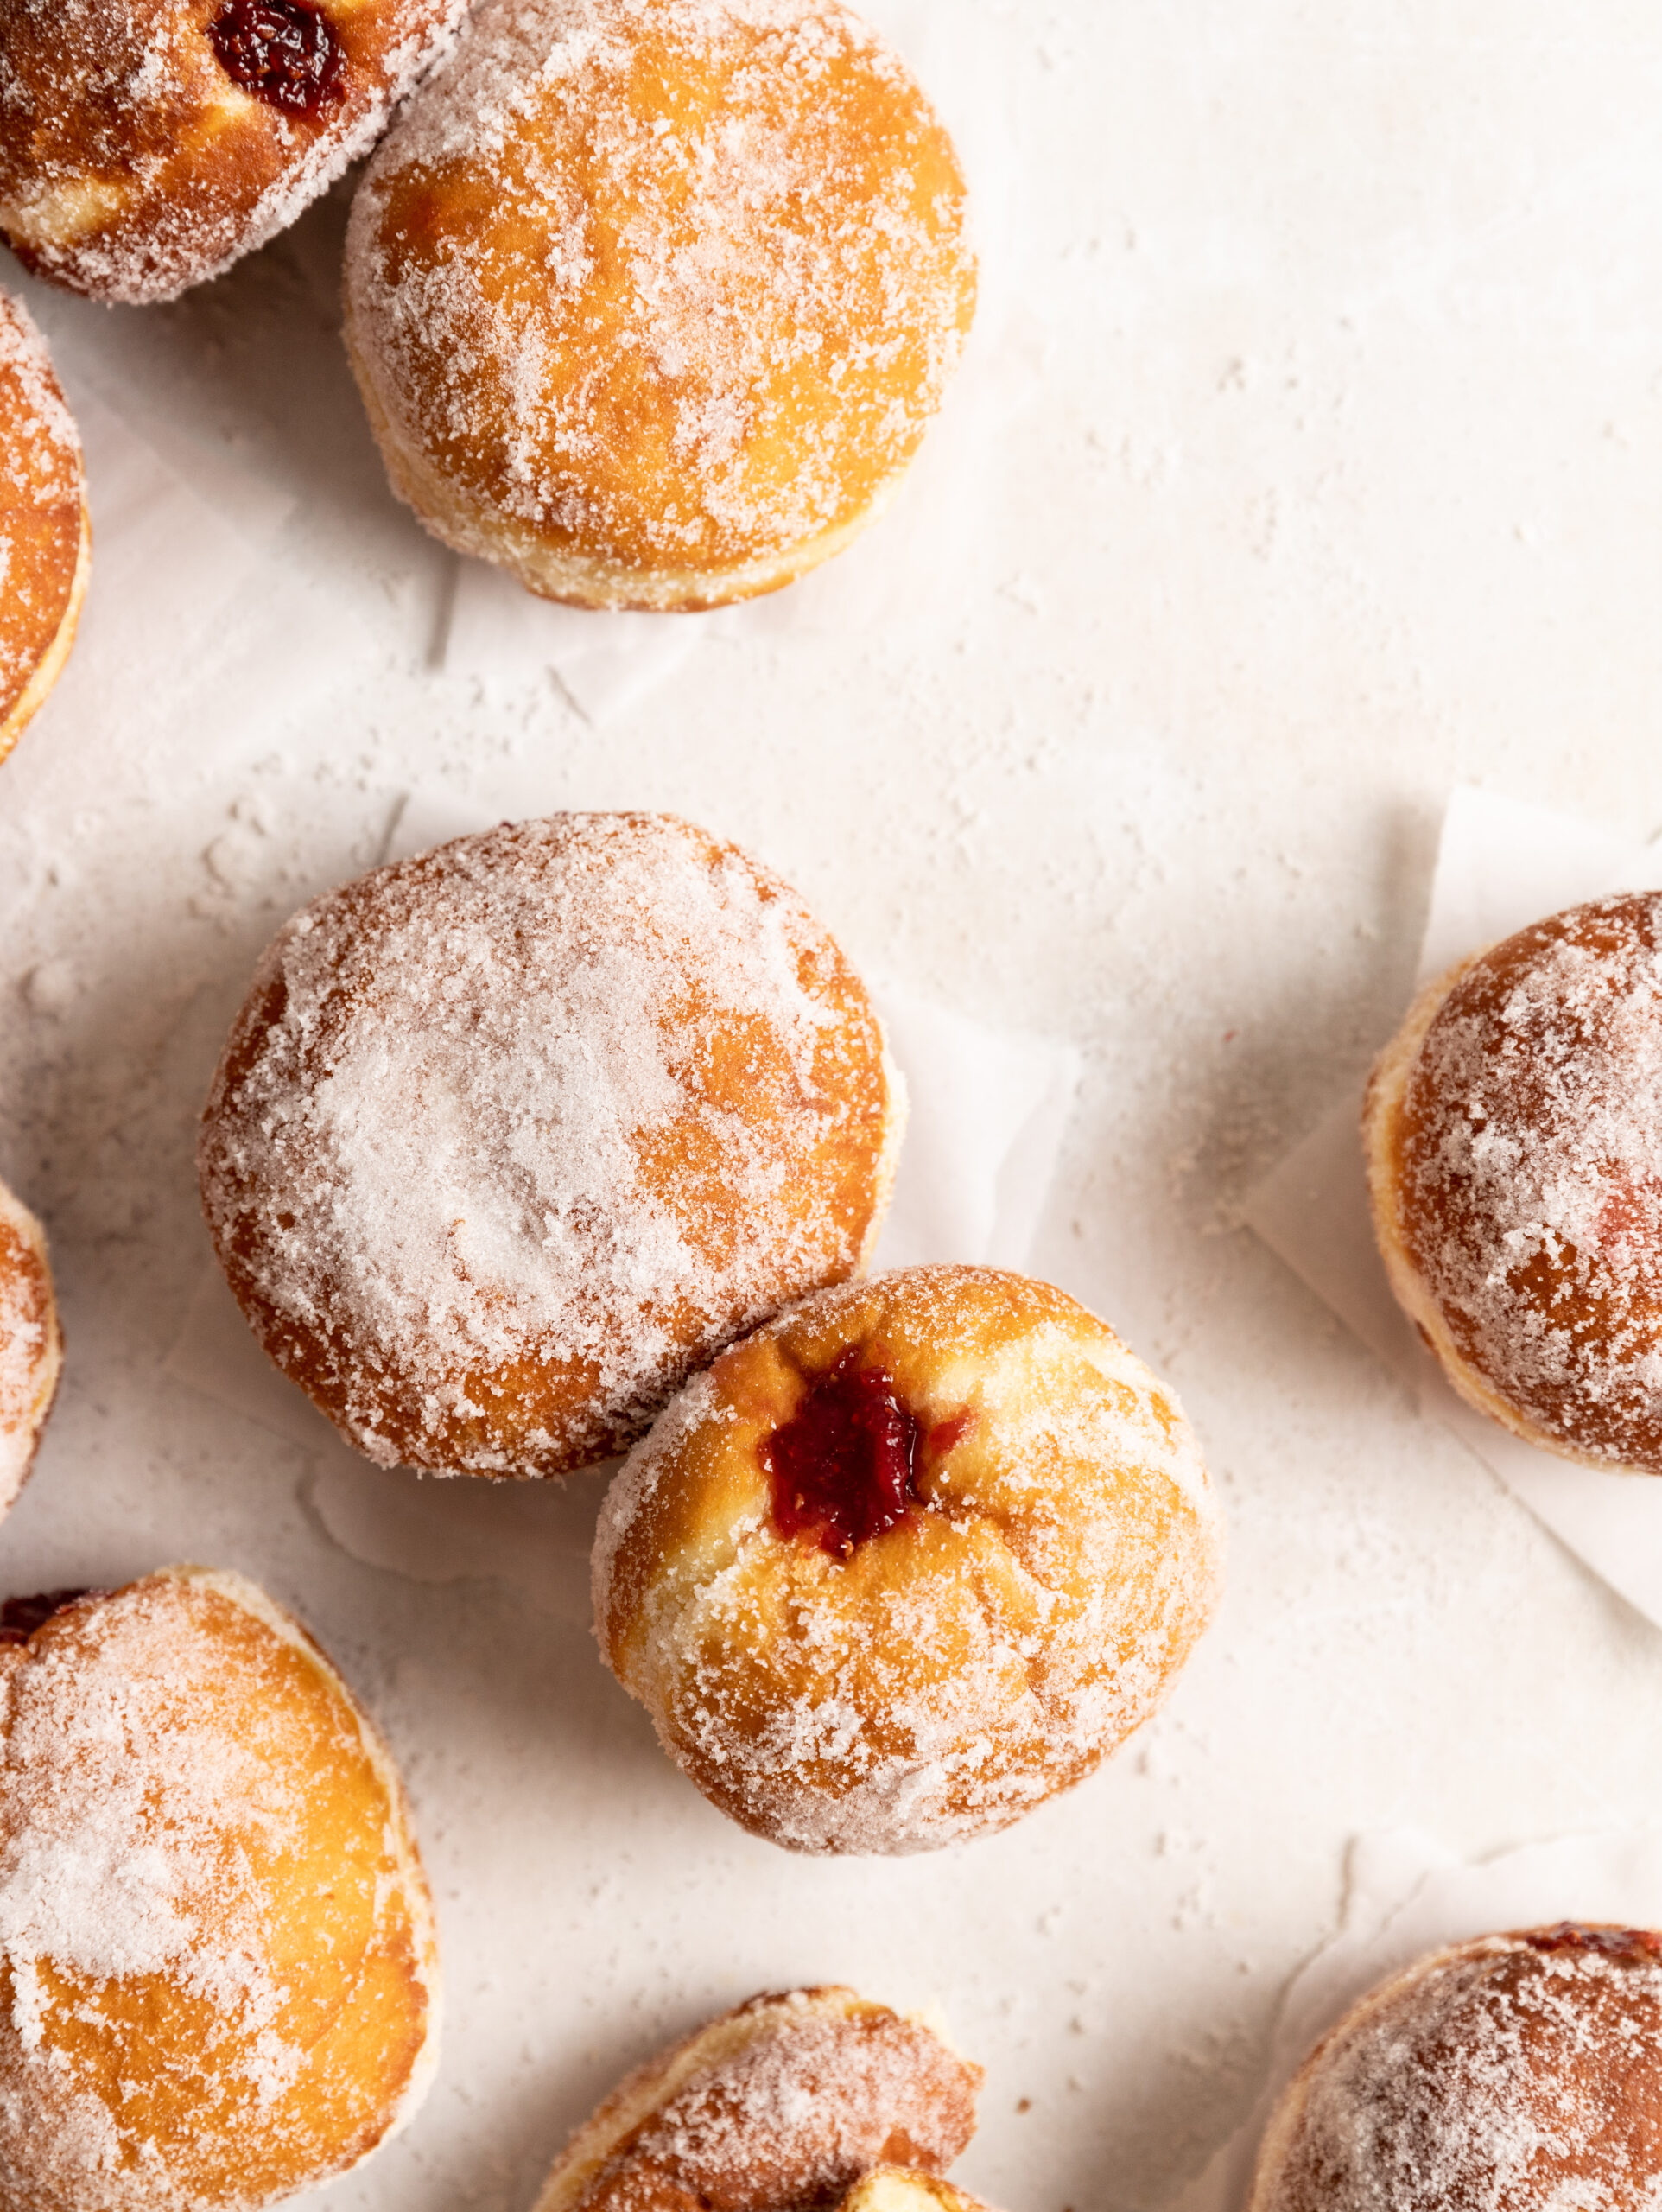 Overhead image of multiple jam filled krapfen rolled in sugar on a few squares of parchment paper.